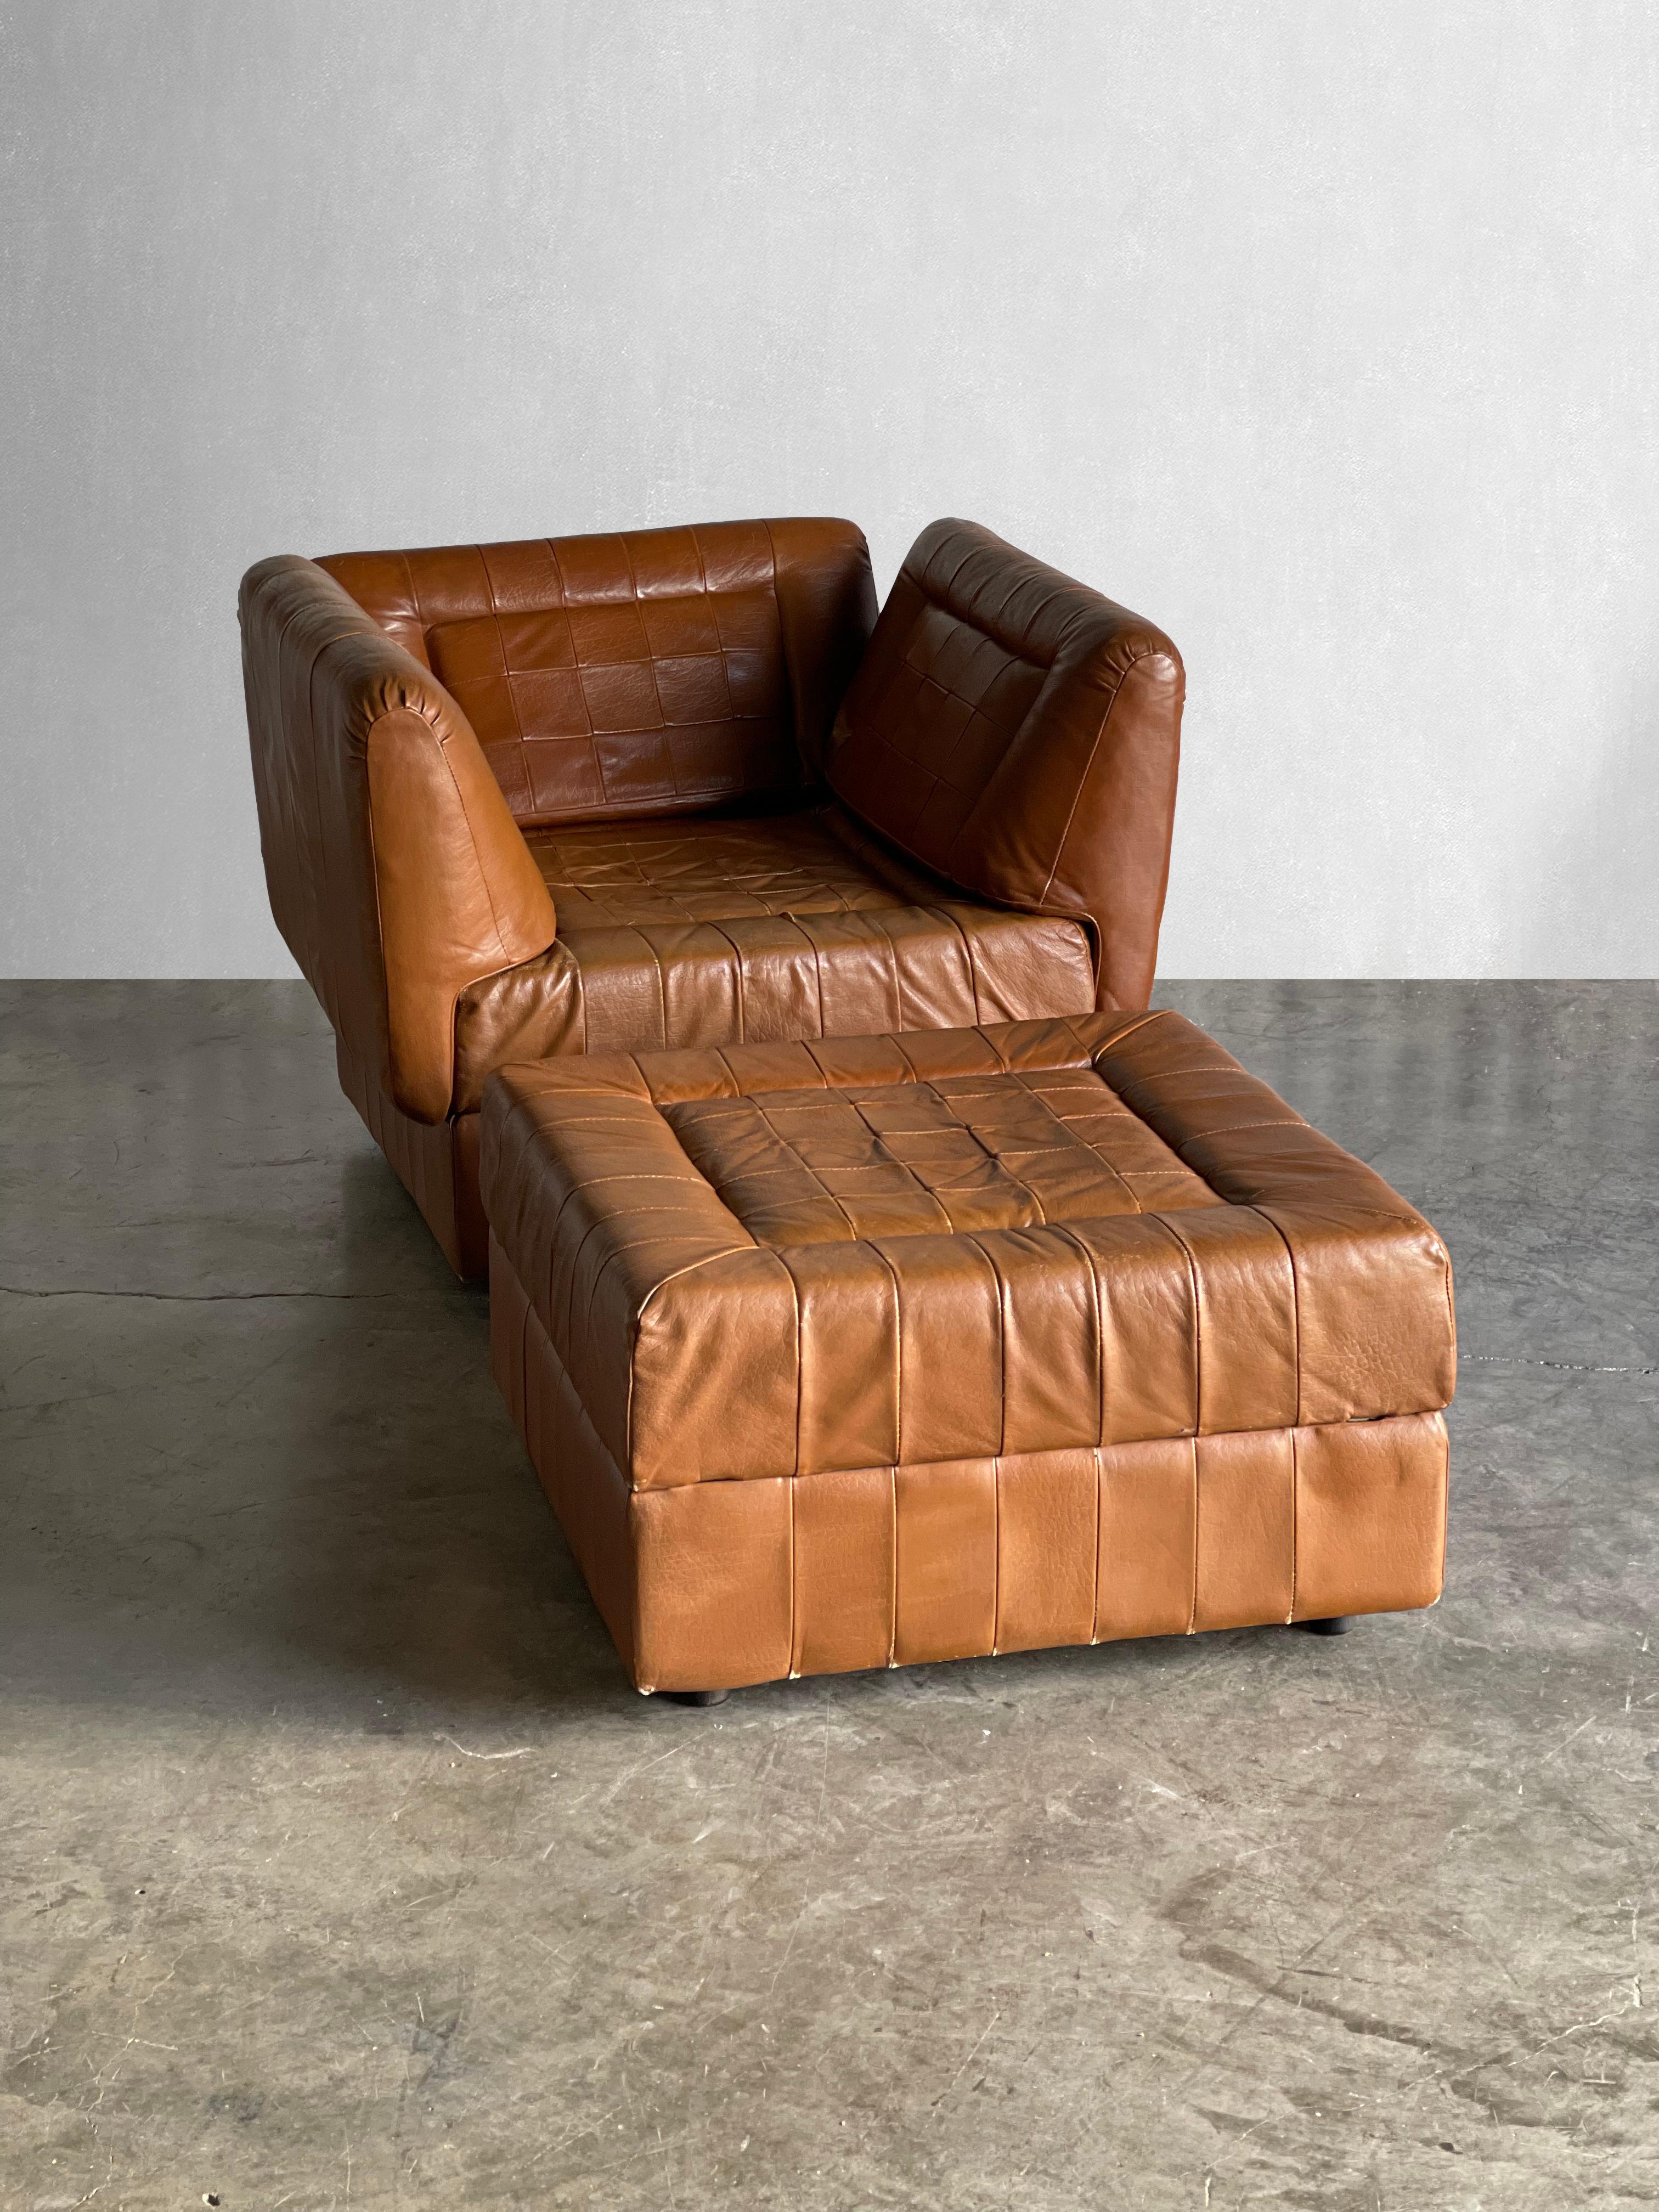 Brazilian Percival Lafer Patchwork Leather Modular Seating For Sale